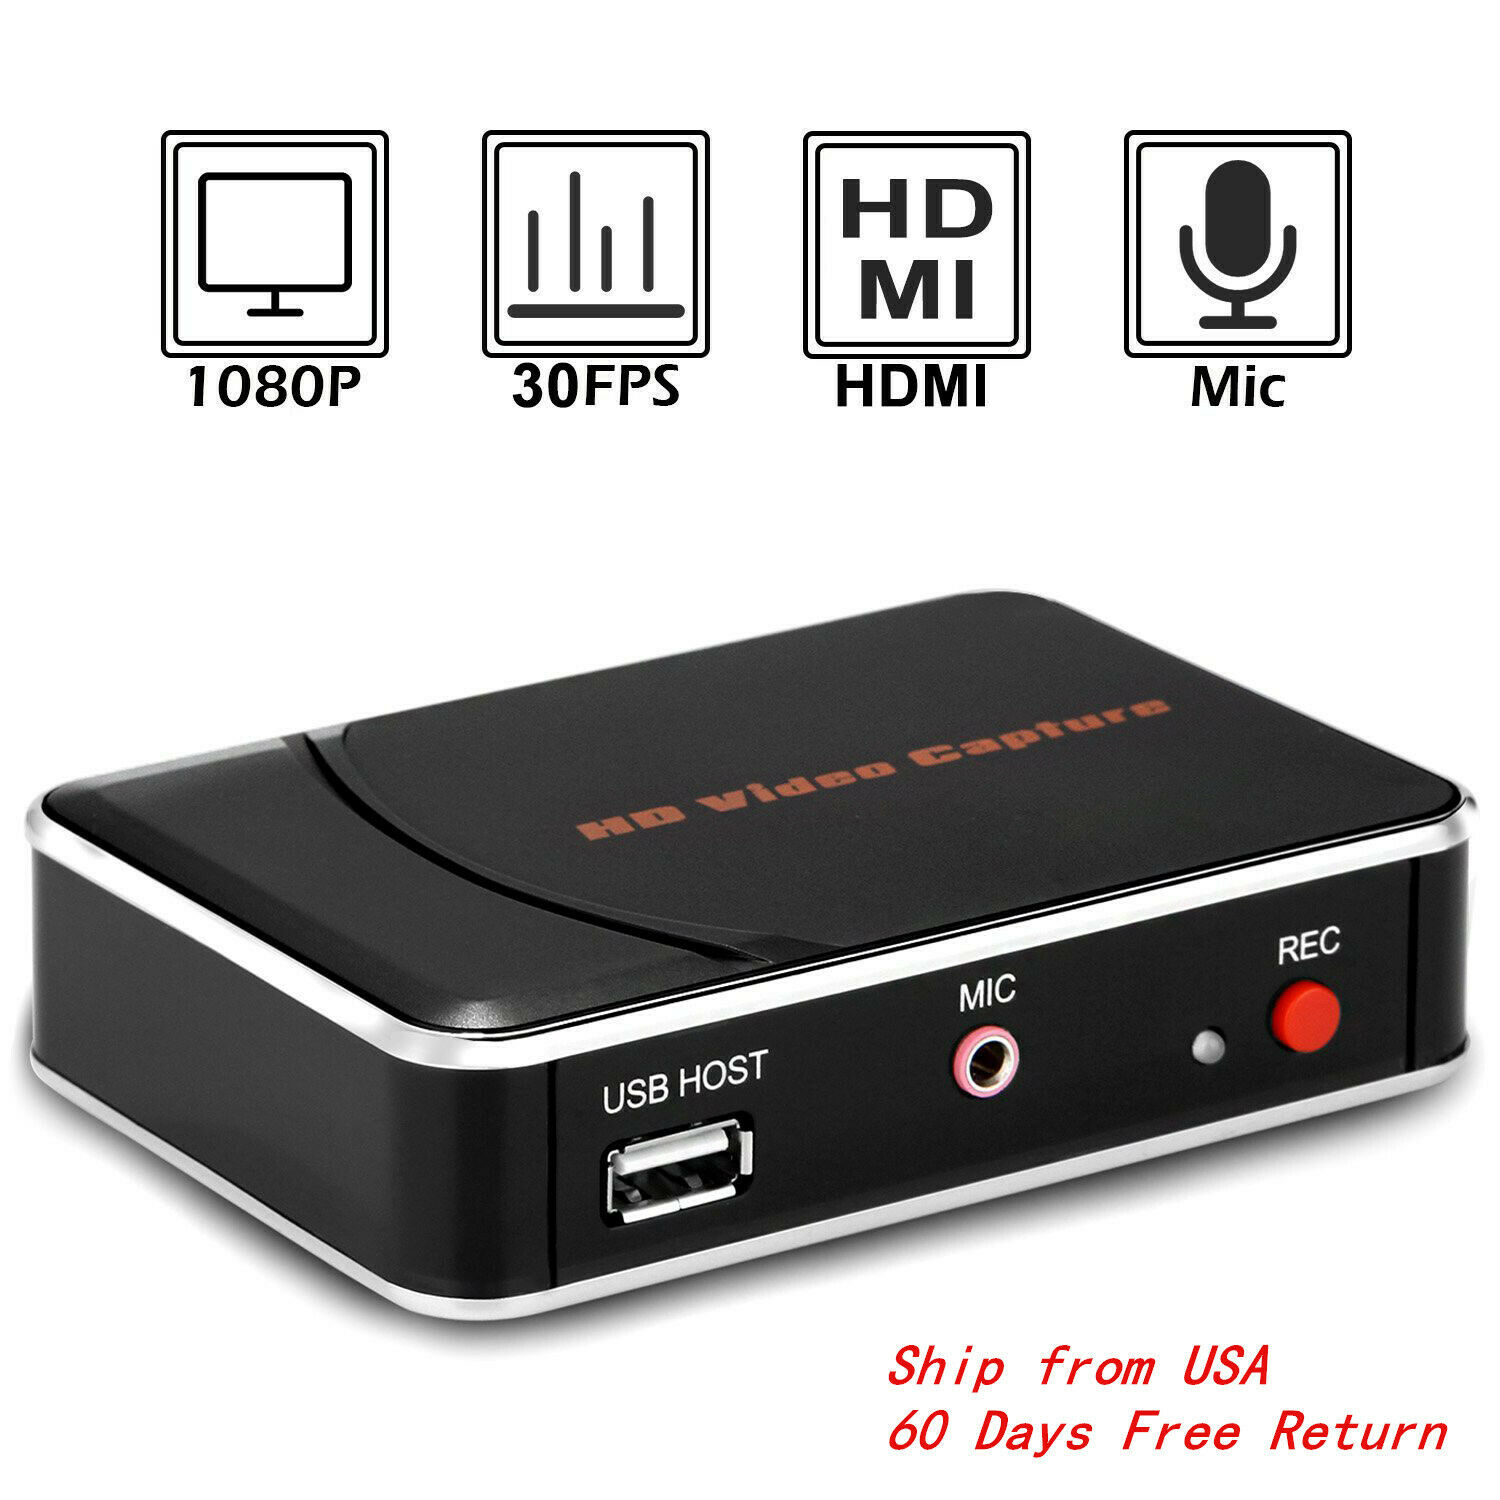 Hdmi Game Capture Card Hd 1080p Video Recording To Usb Disk For Ps4 Xbox360 Wiiu